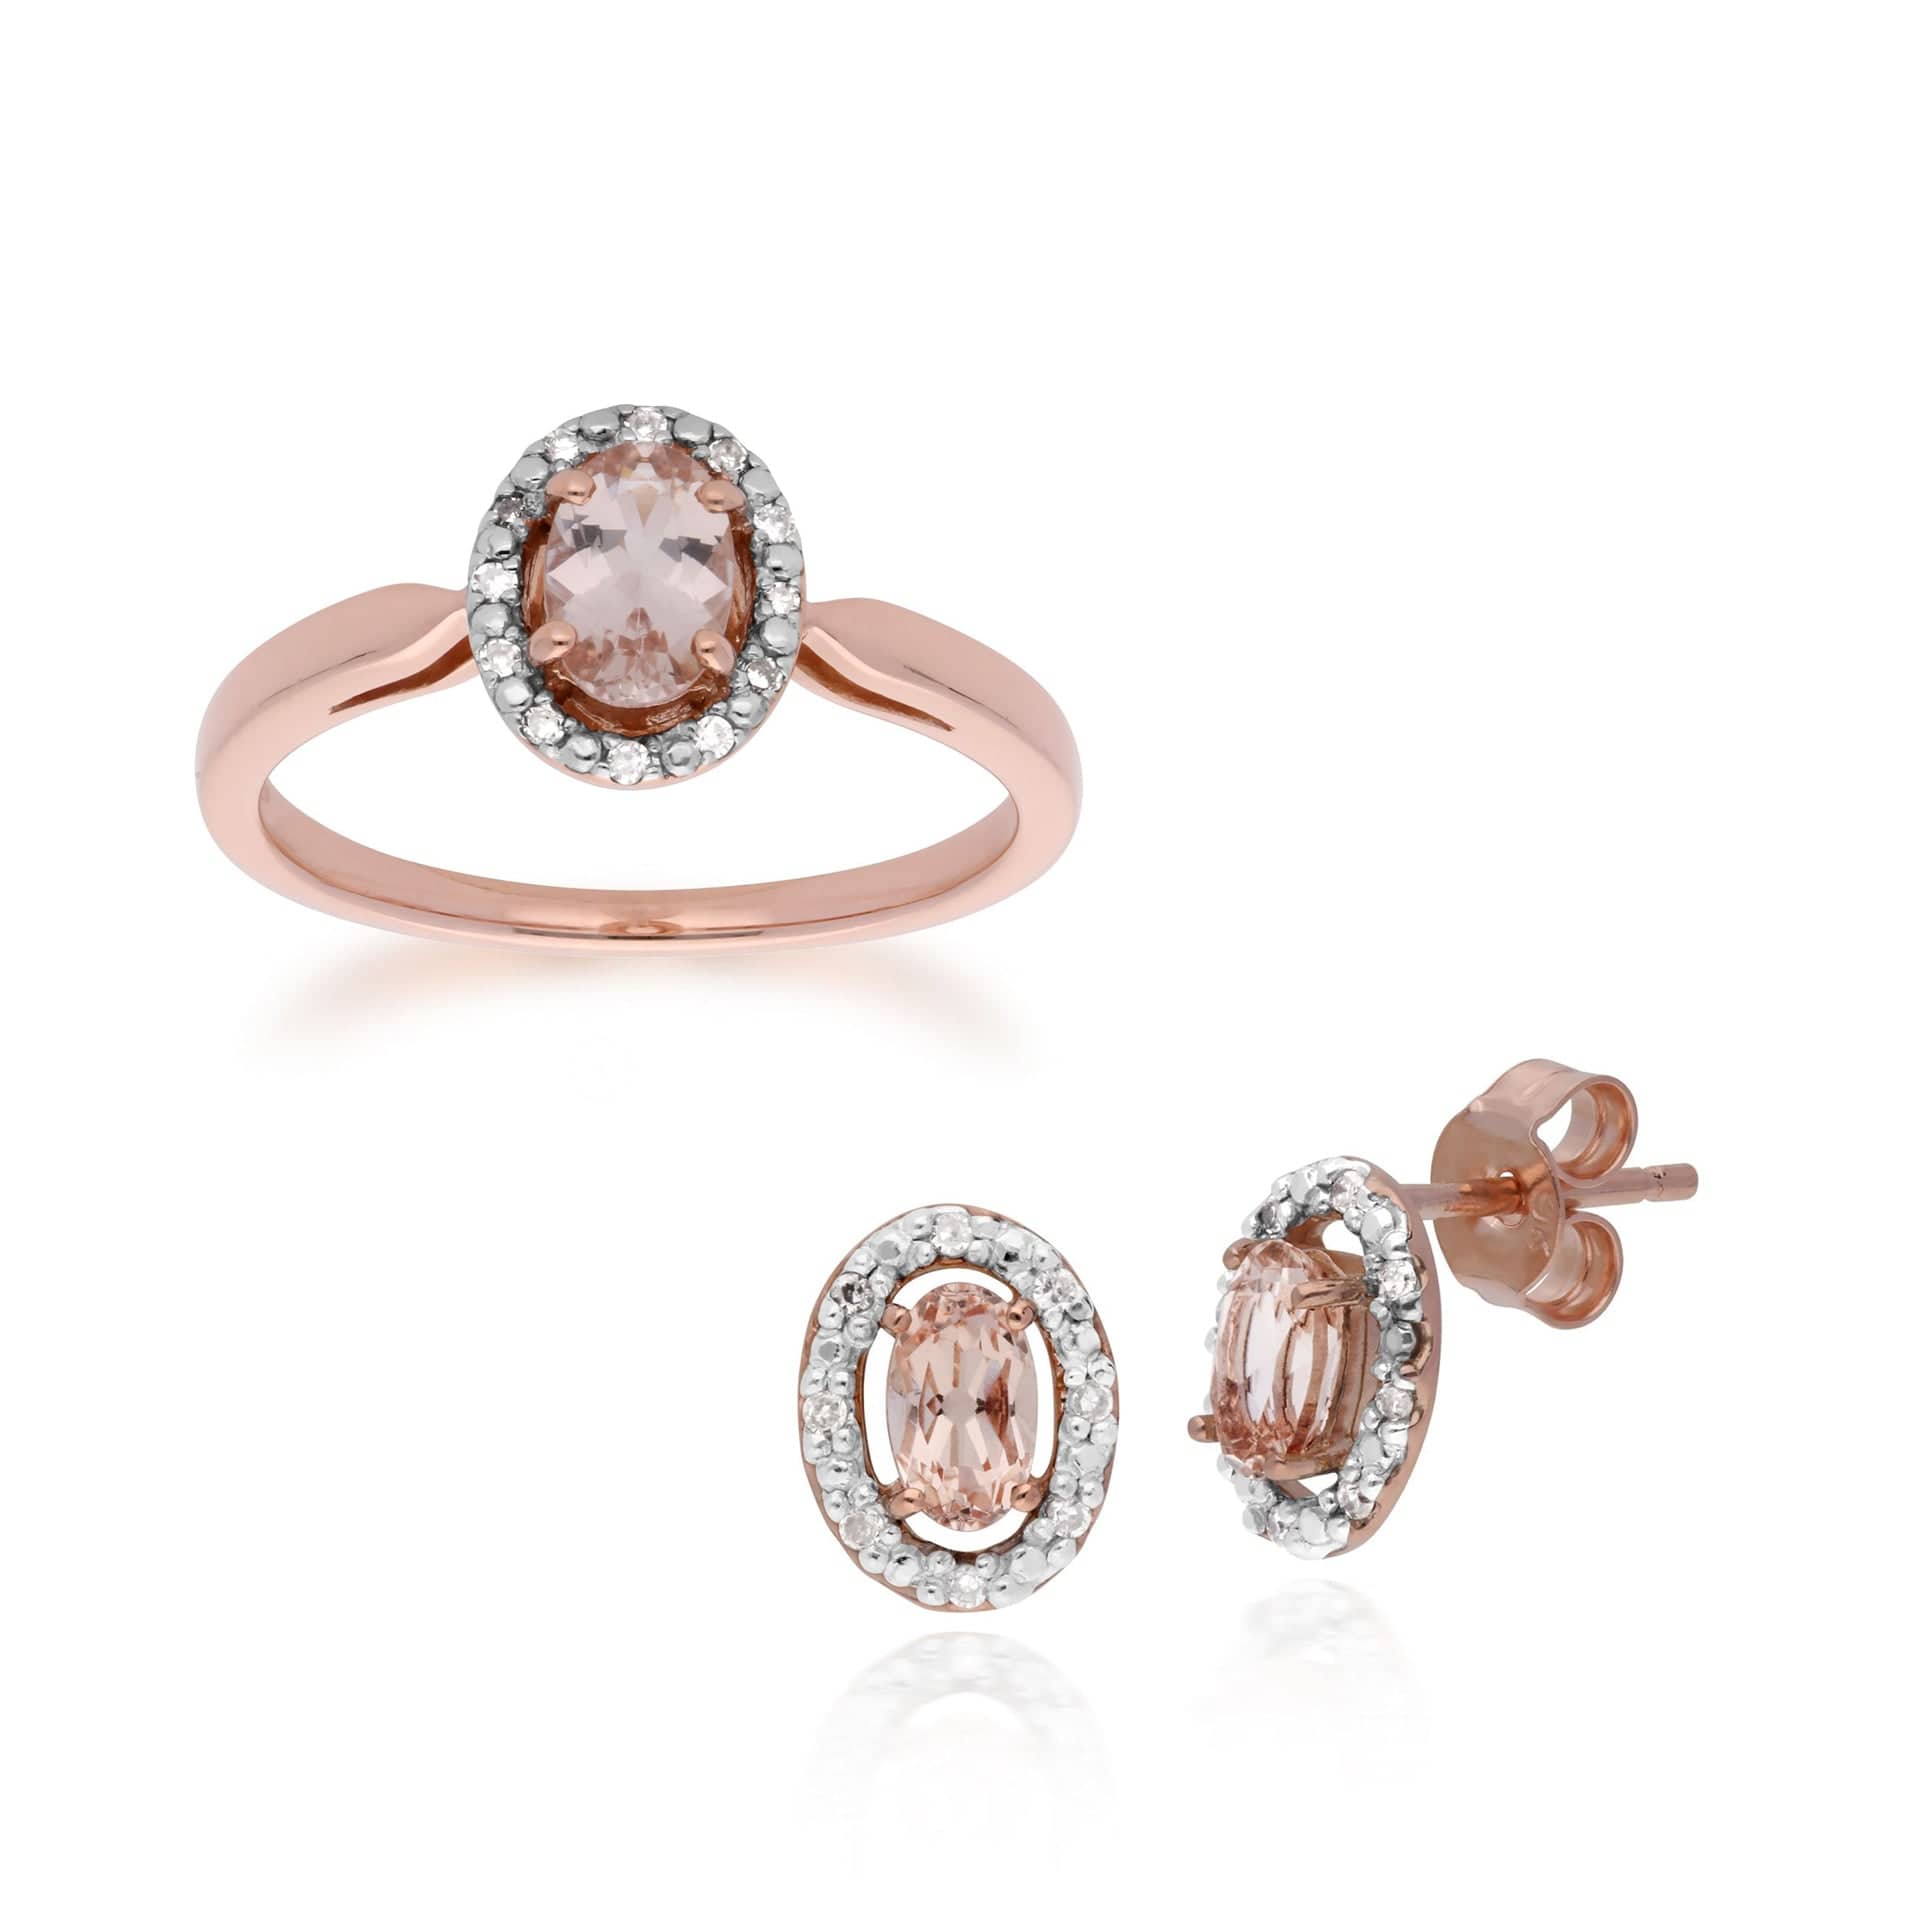 Classic Oval Morganite & Diamond Halo Stud Earrings & Solitaire Ring Set in 9ct Rose Gold - Gemondo